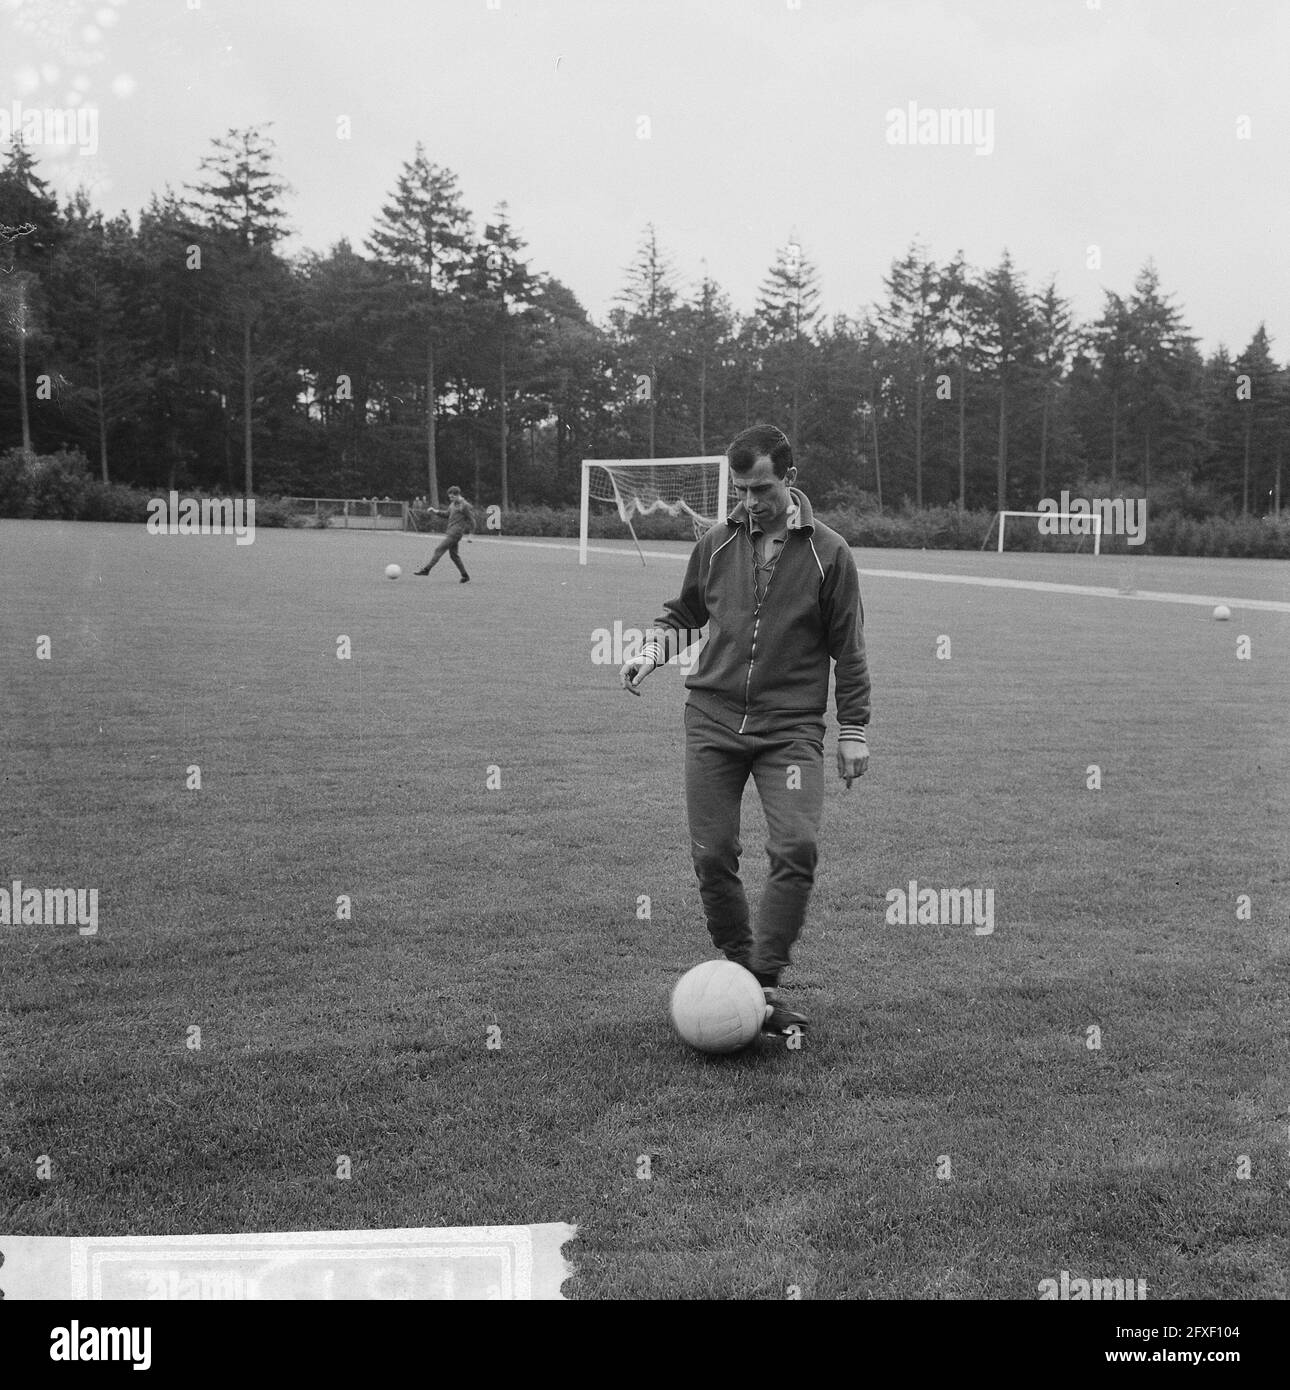 Training Feyenoord, Coen Moulijn during training, September 7, 1965, sports, training, soccer, The Netherlands, 20th century press agency photo, news to remember, documentary, historic photography 1945-1990, visual stories, human history of the Twentieth Century, capturing moments in time Stock Photo